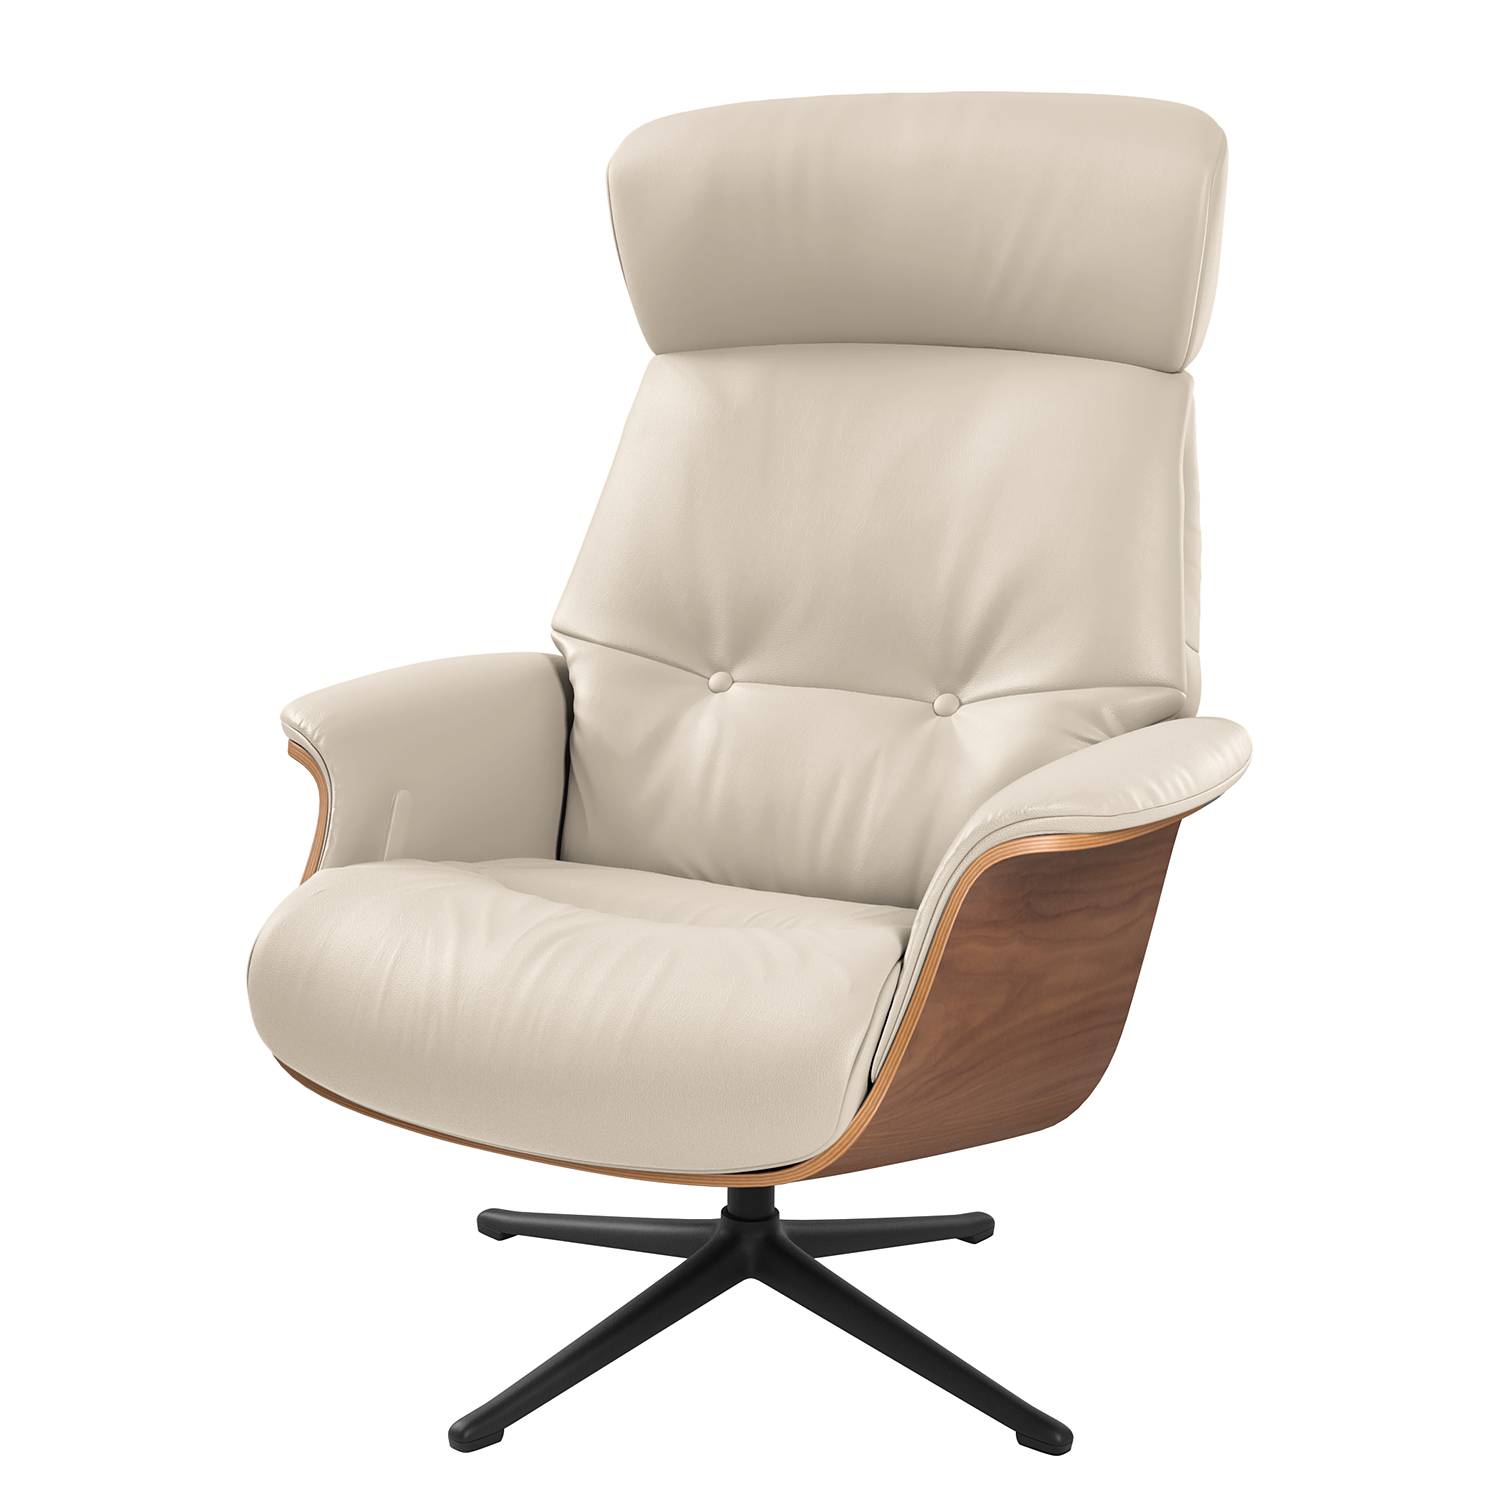 Image of Fauteuil relax Anderson I 000000001000129665